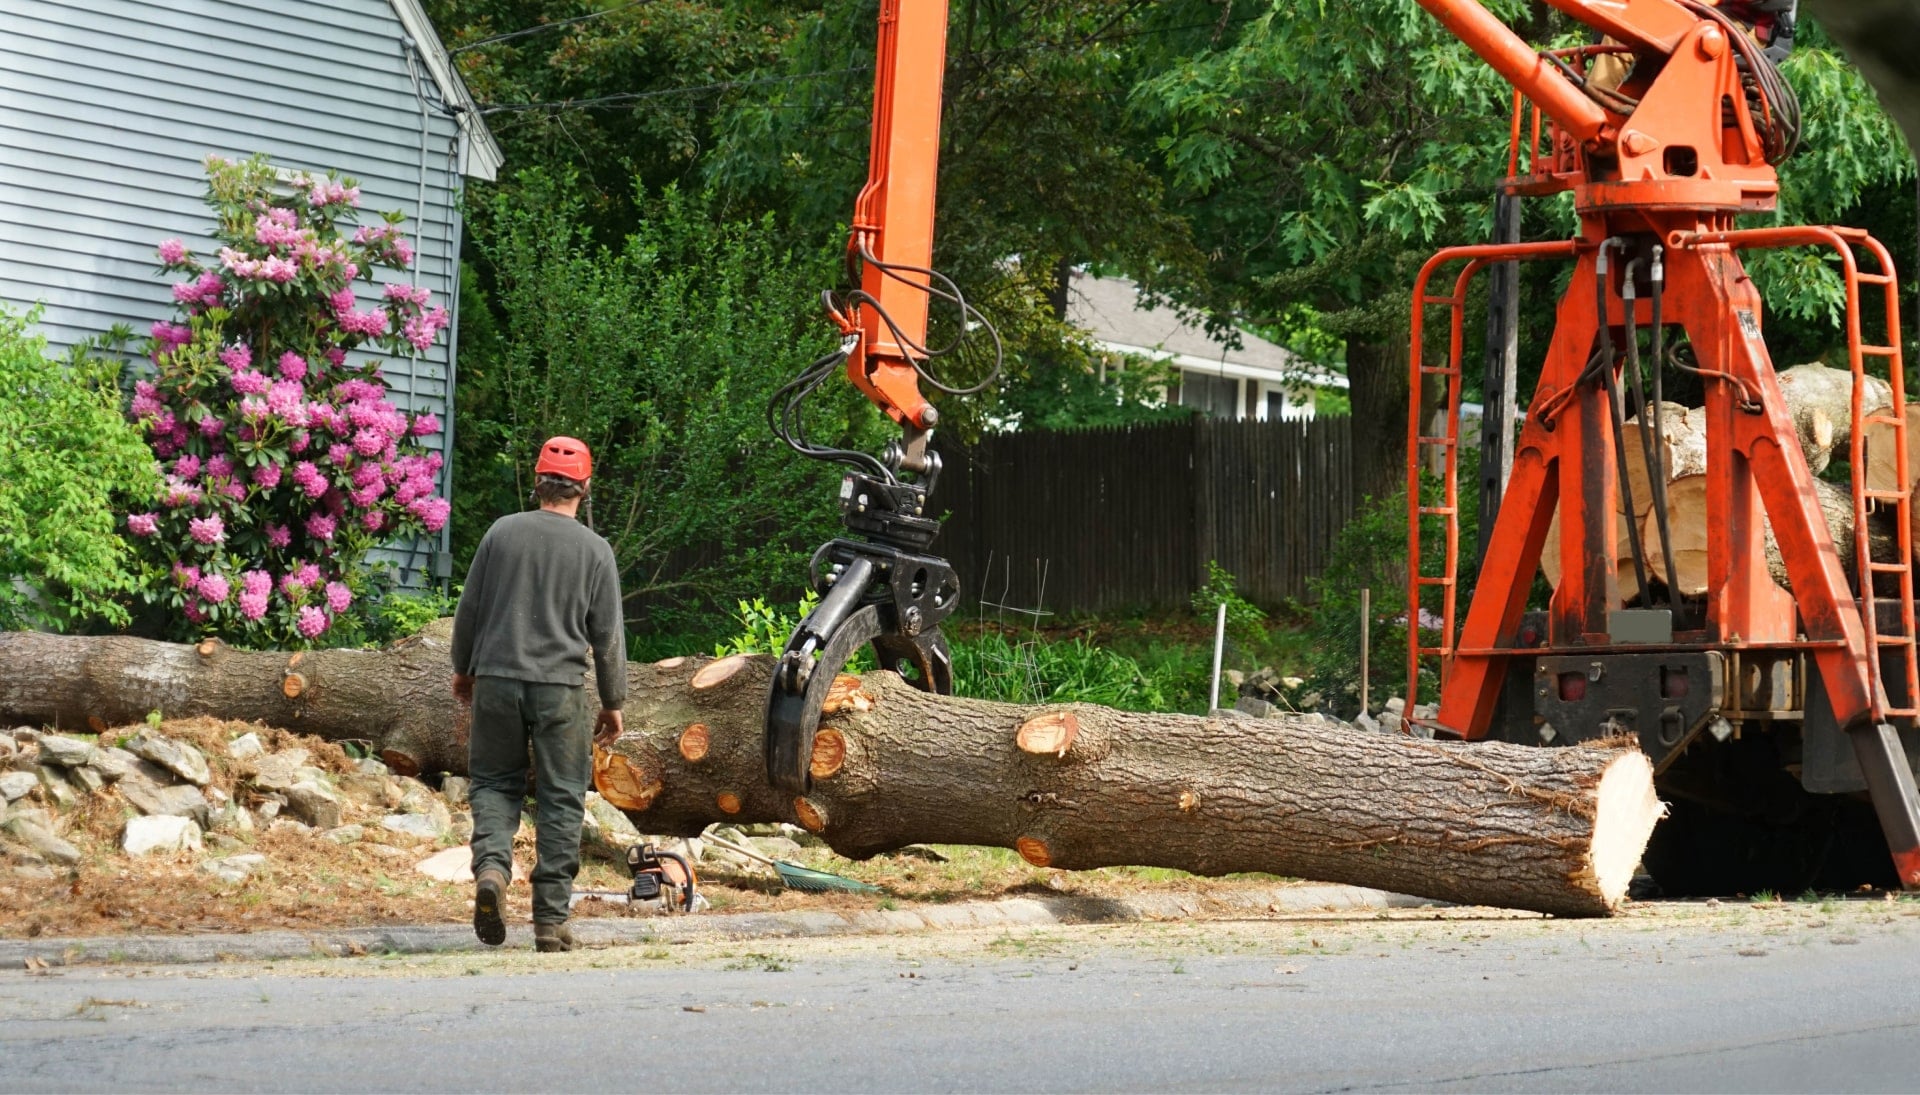 Heavy machinery is used to remove a tree after cutting in a Baltimore, MA yard